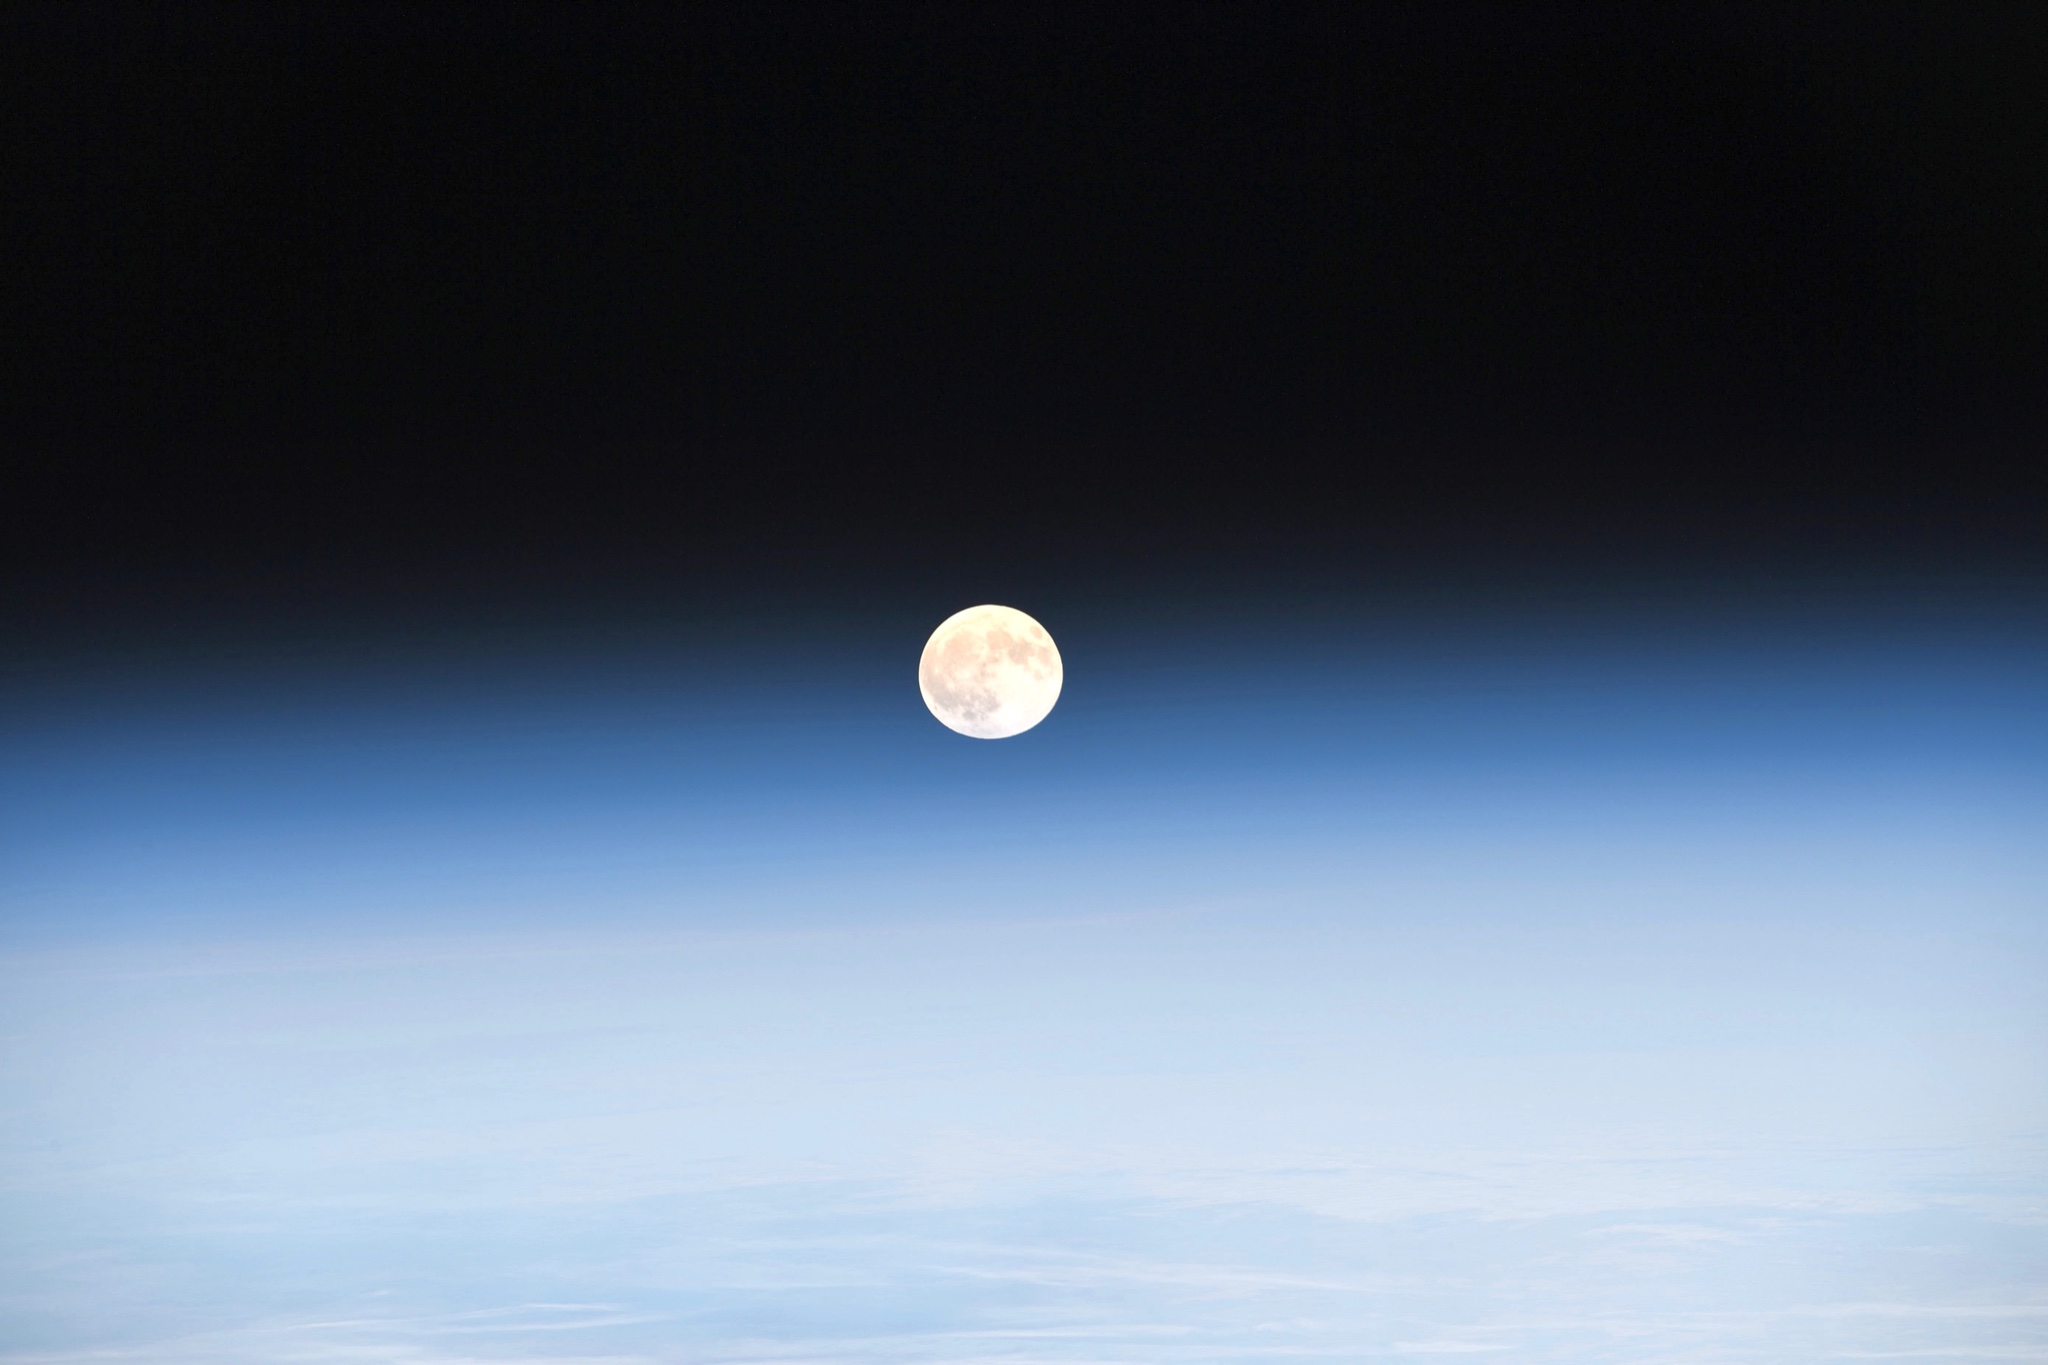 astronaut captures stunning moonrise from space station 5